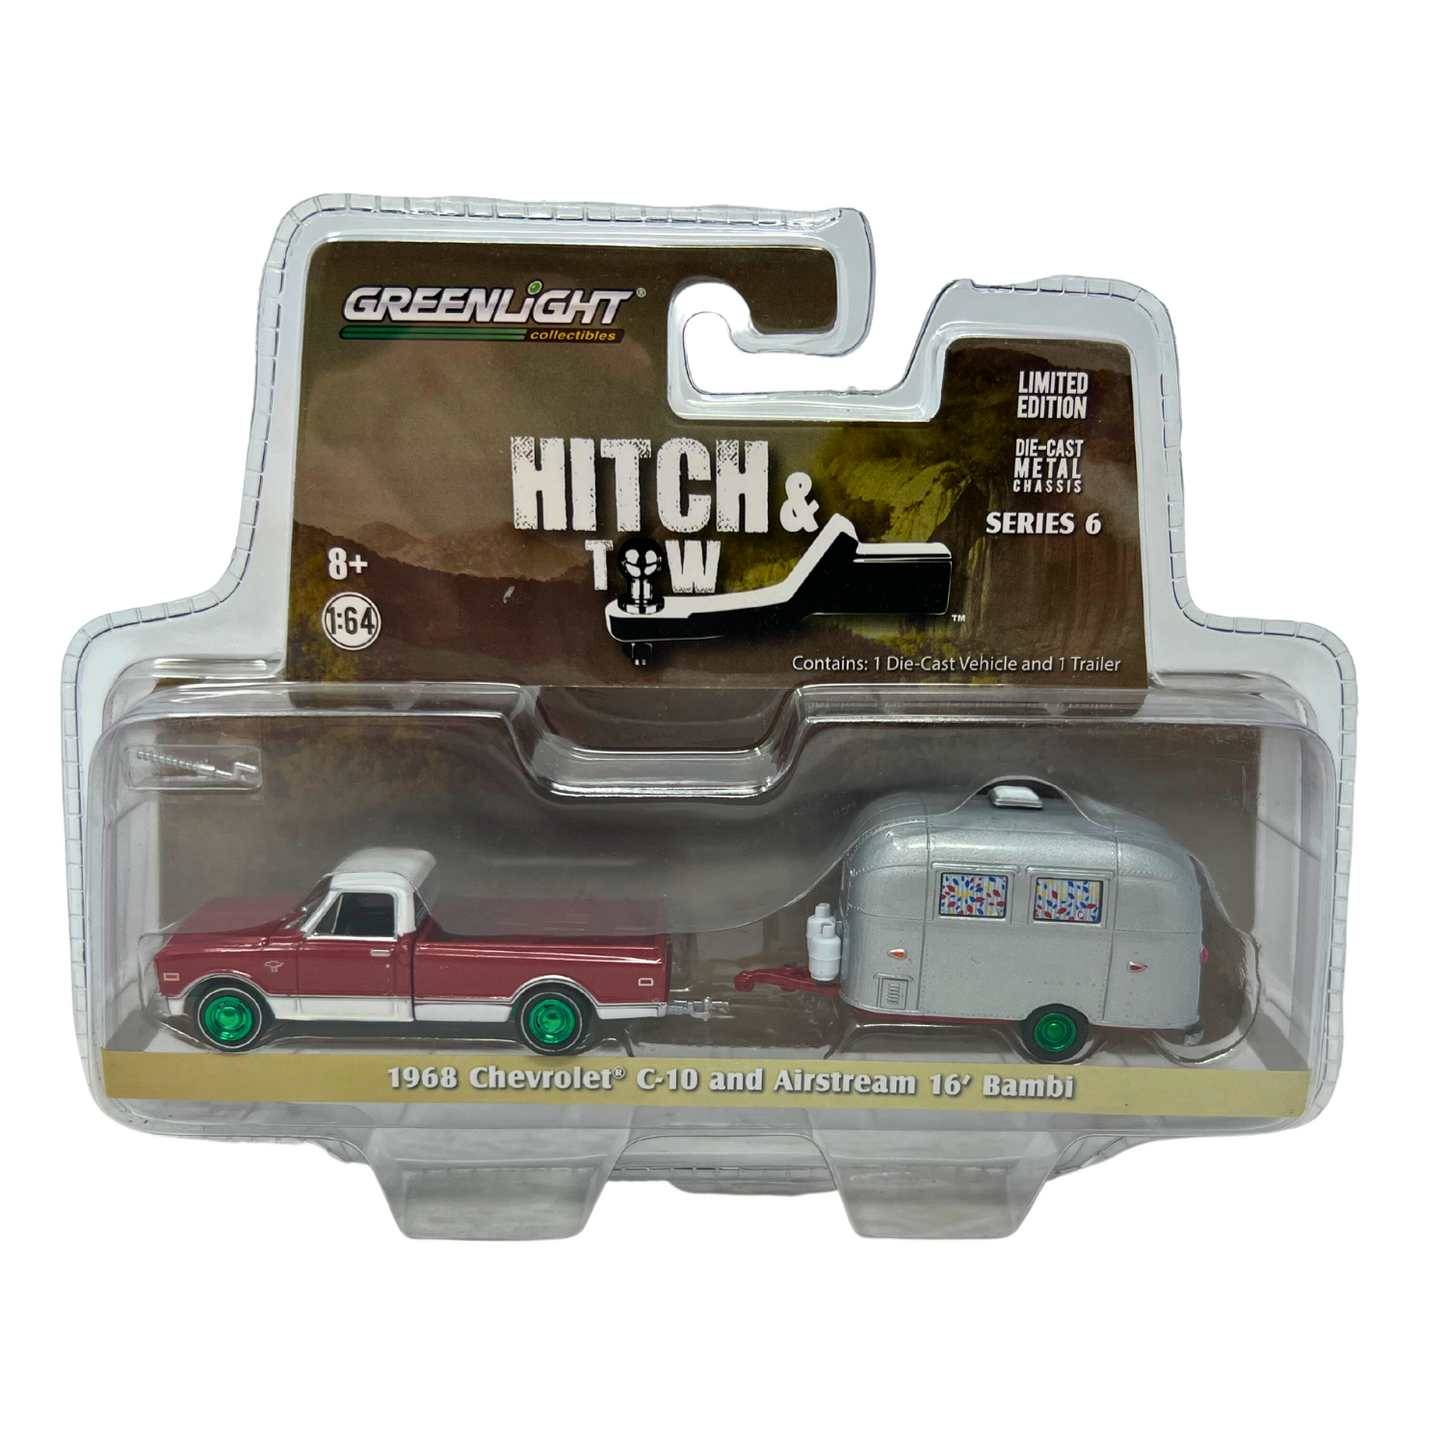 Greenlight Hitch & Tow 1968 Chevy C-10 and Airstream Green Machine 1:64 Diecast